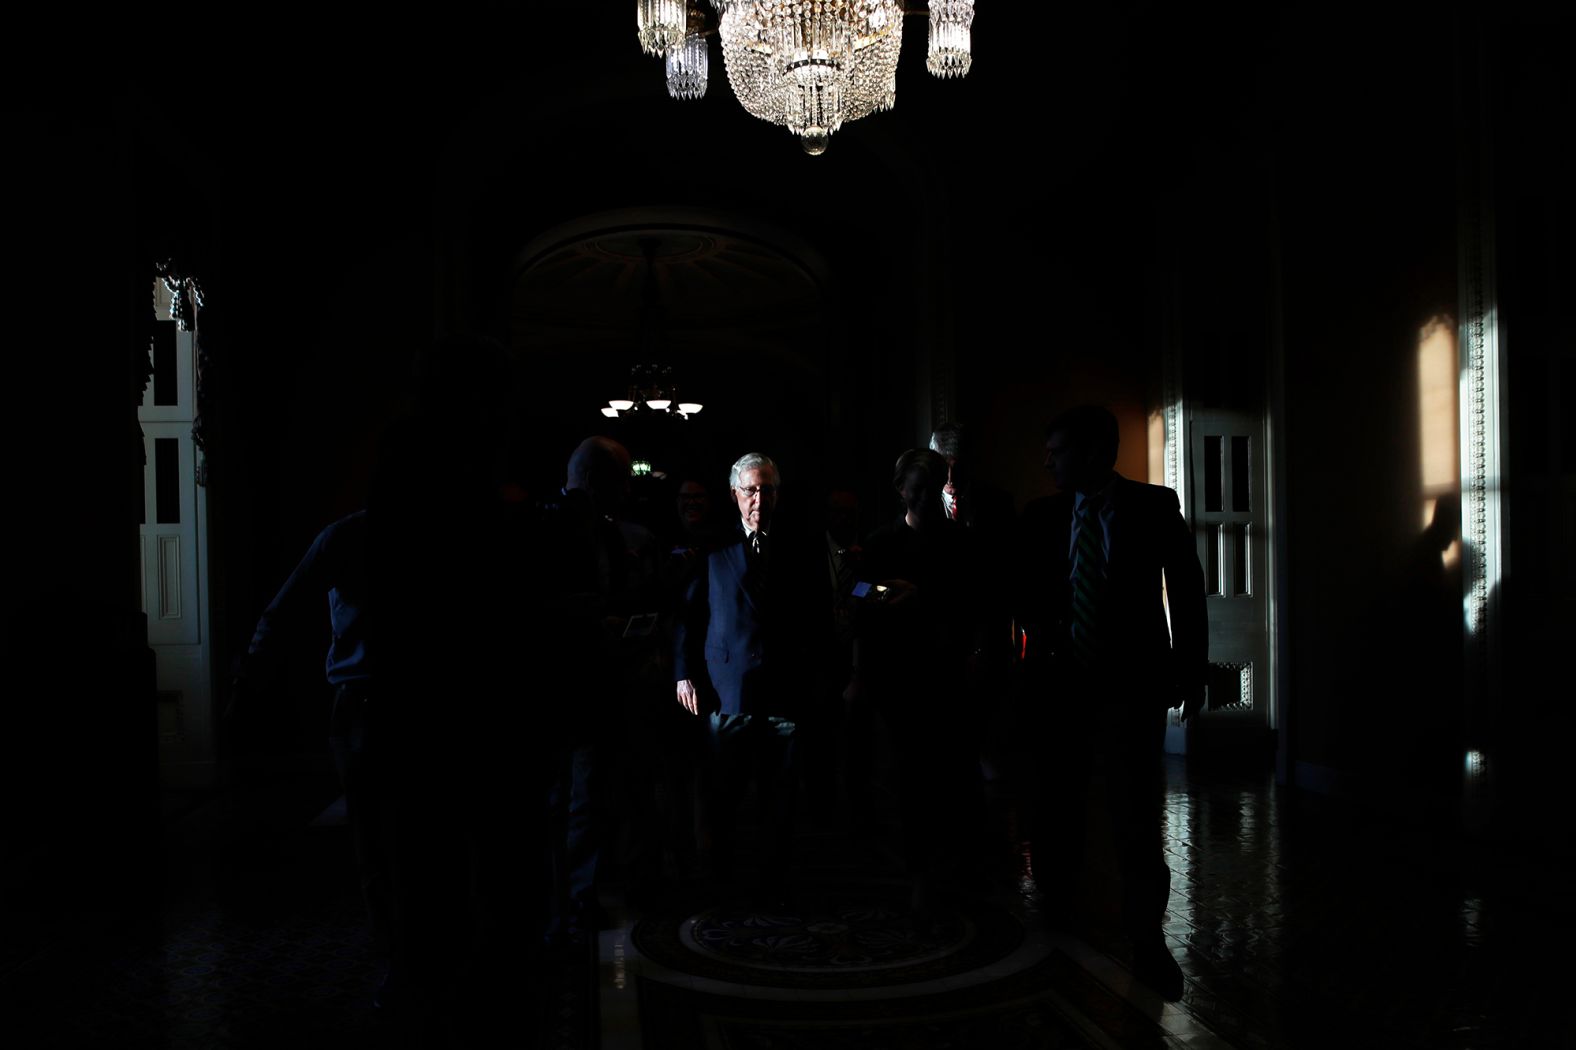 McConnell leaves the Senate chamber in September 2018 after the Senate Judiciary Committee advanced Brett Kavanaugh's nomination for the Supreme Court.